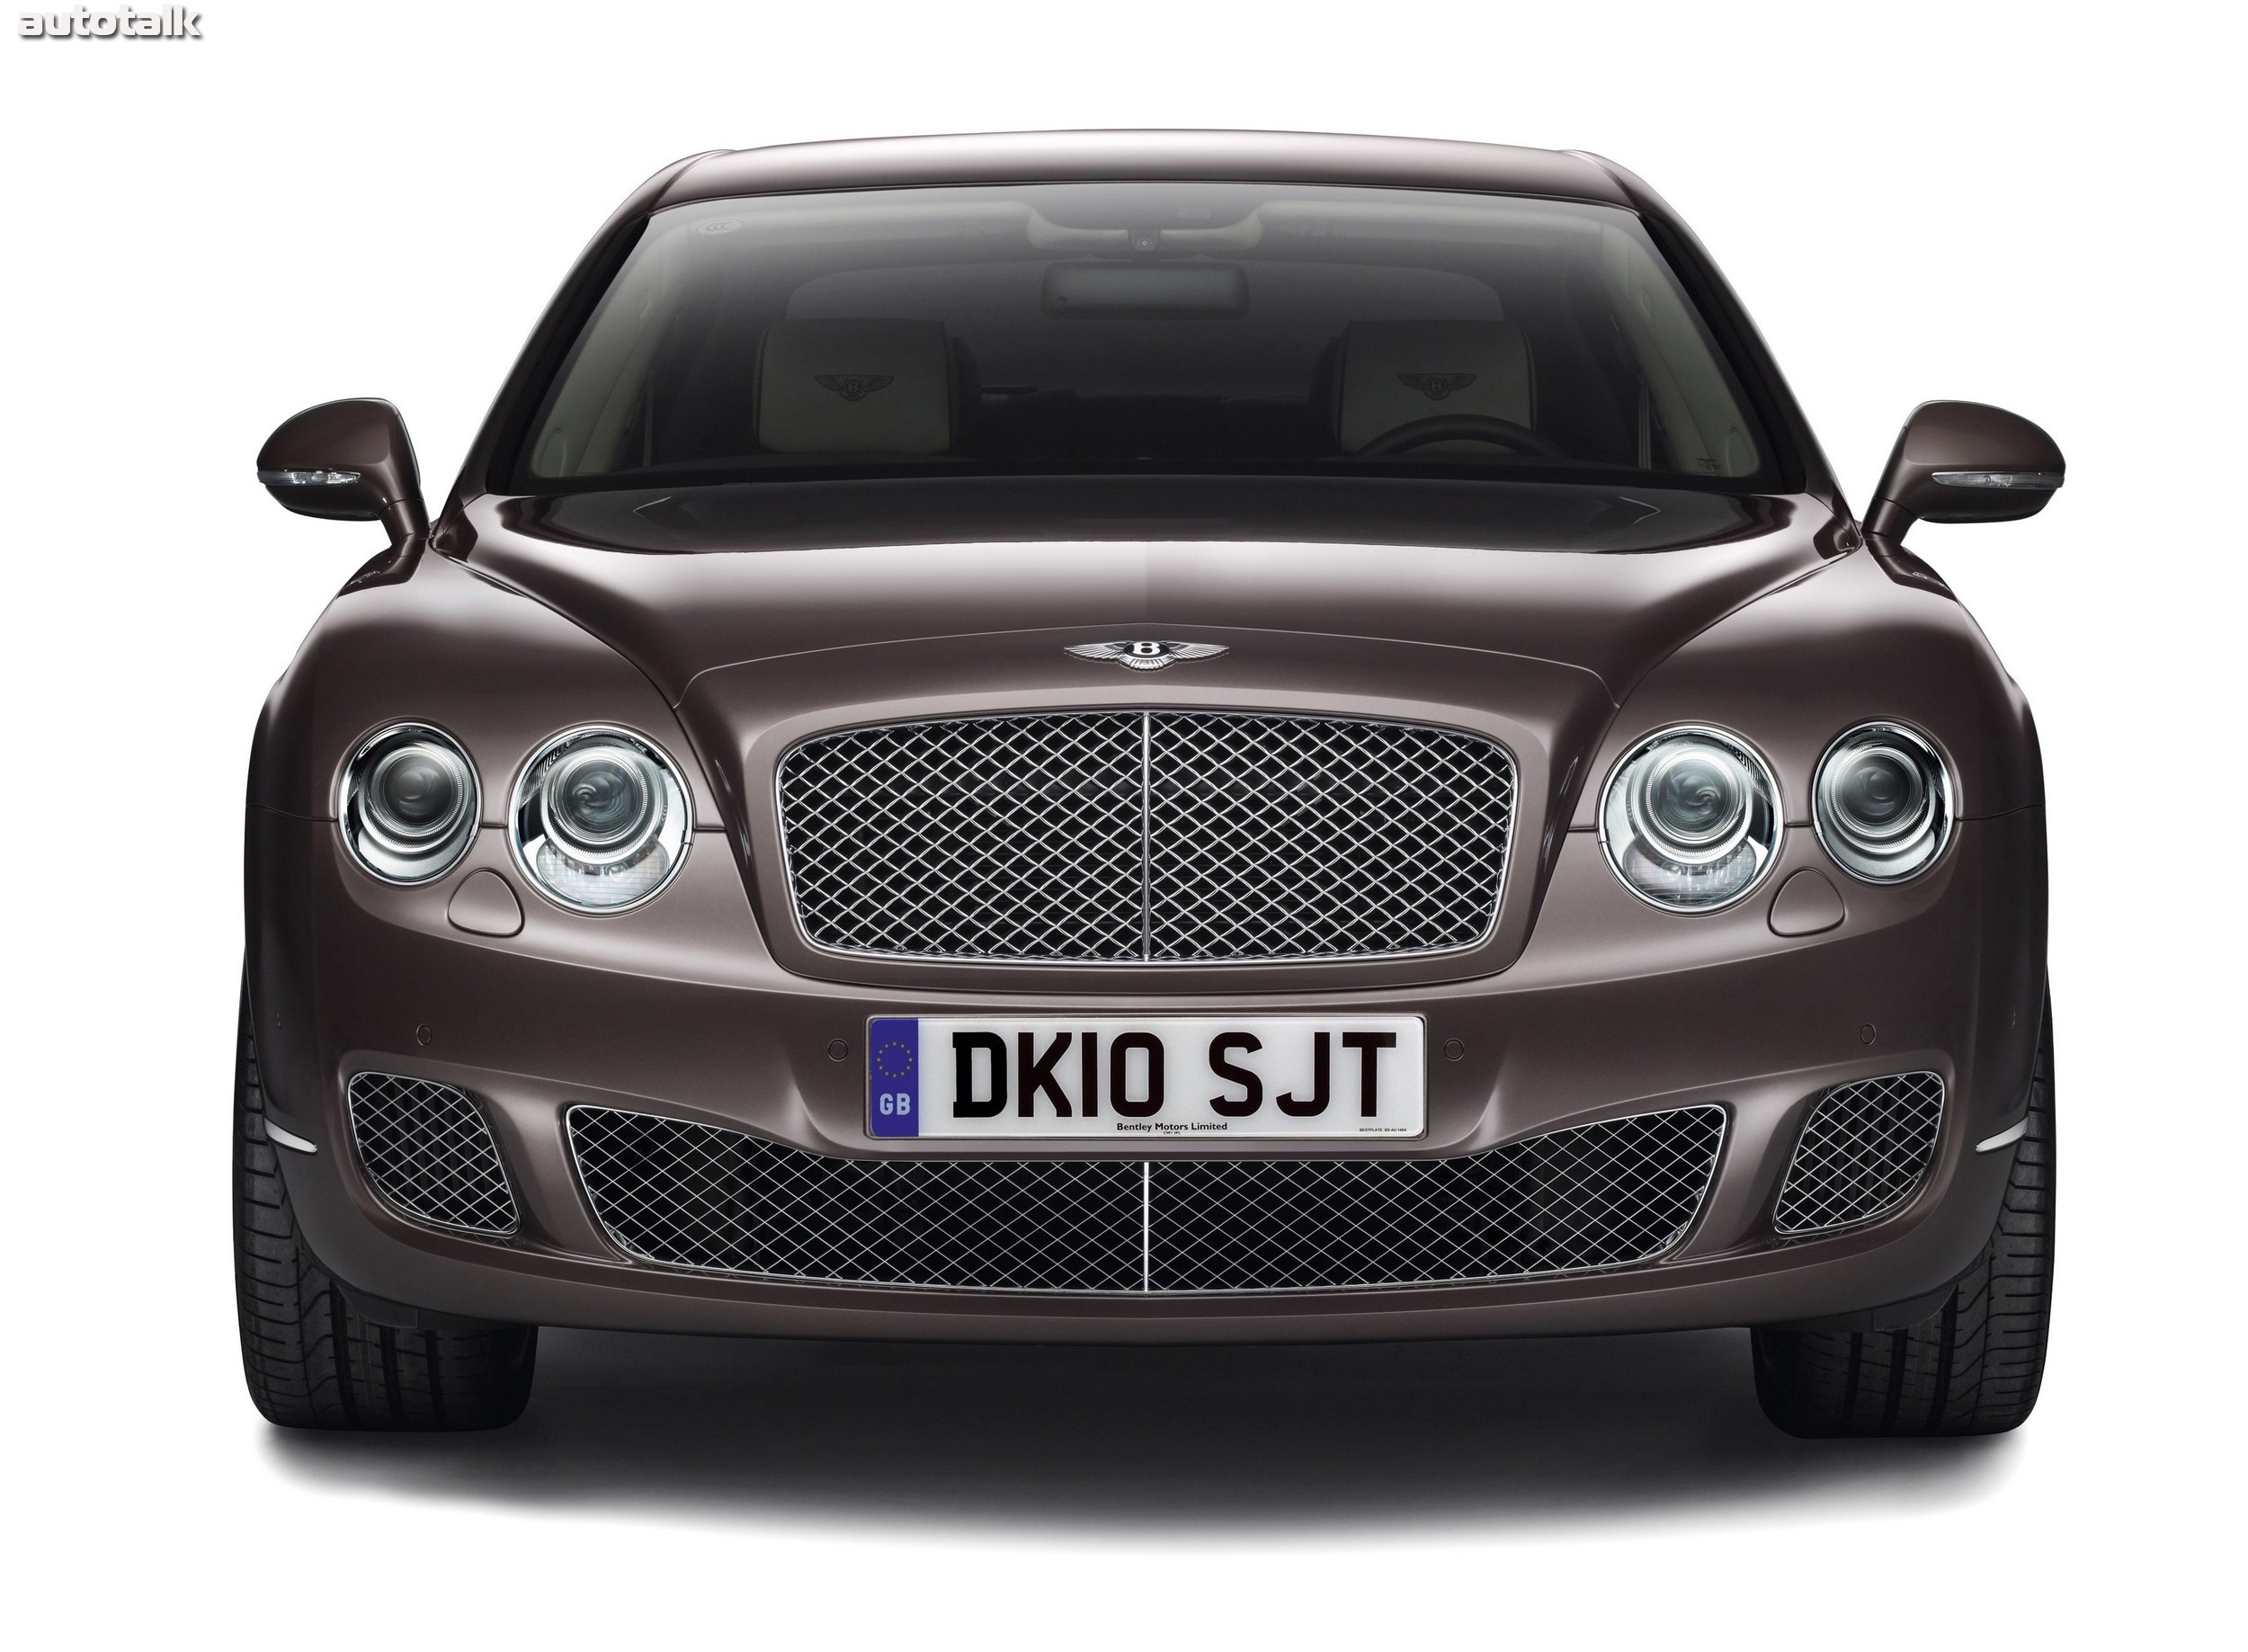 Bentley Continental Flying Spur Speed China